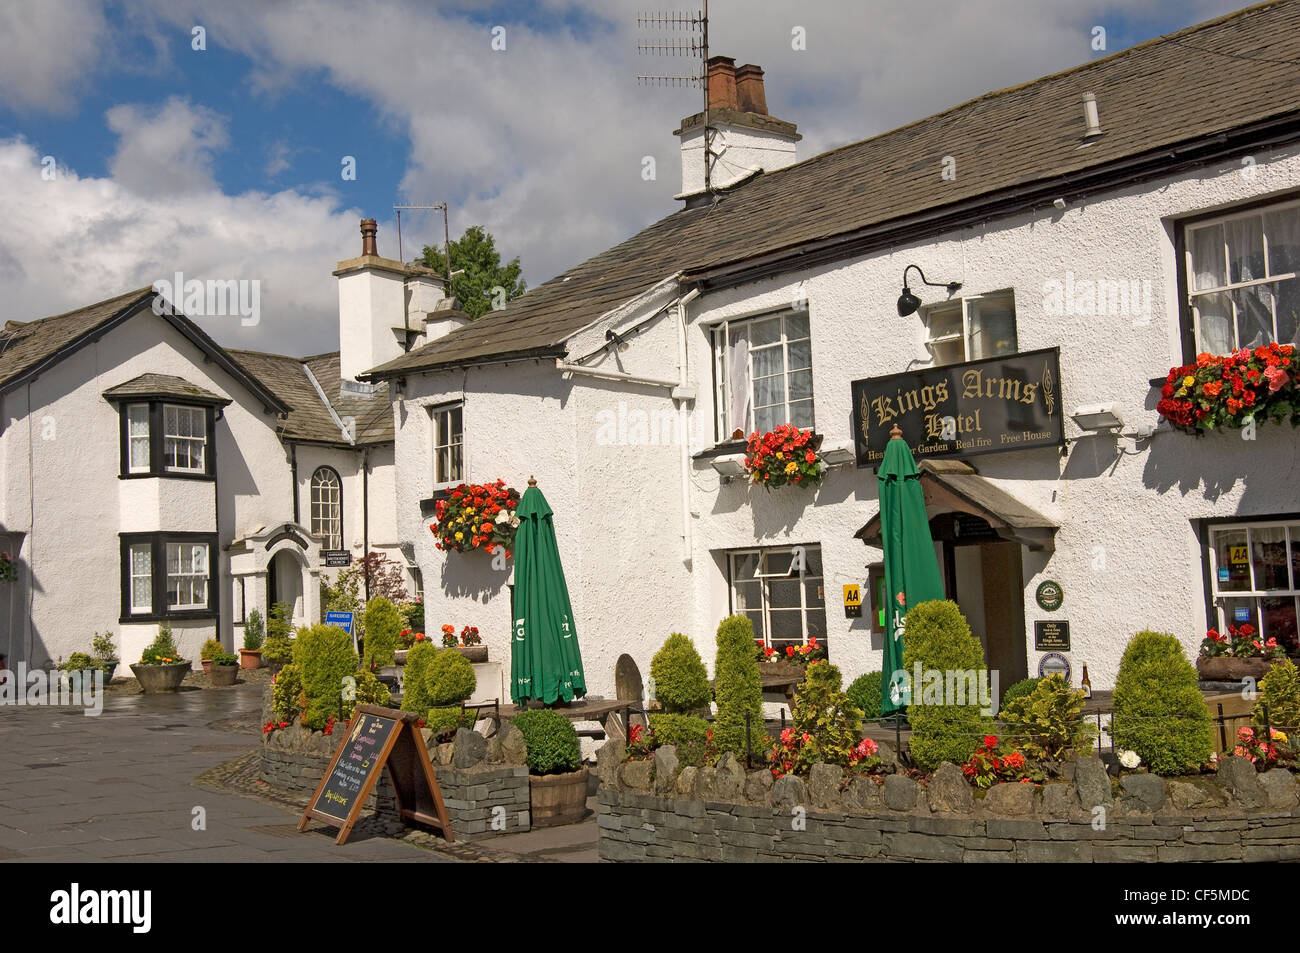 The Kings Arms Hotel public house and Methodist church in Hawkshead Village. Stock Photo